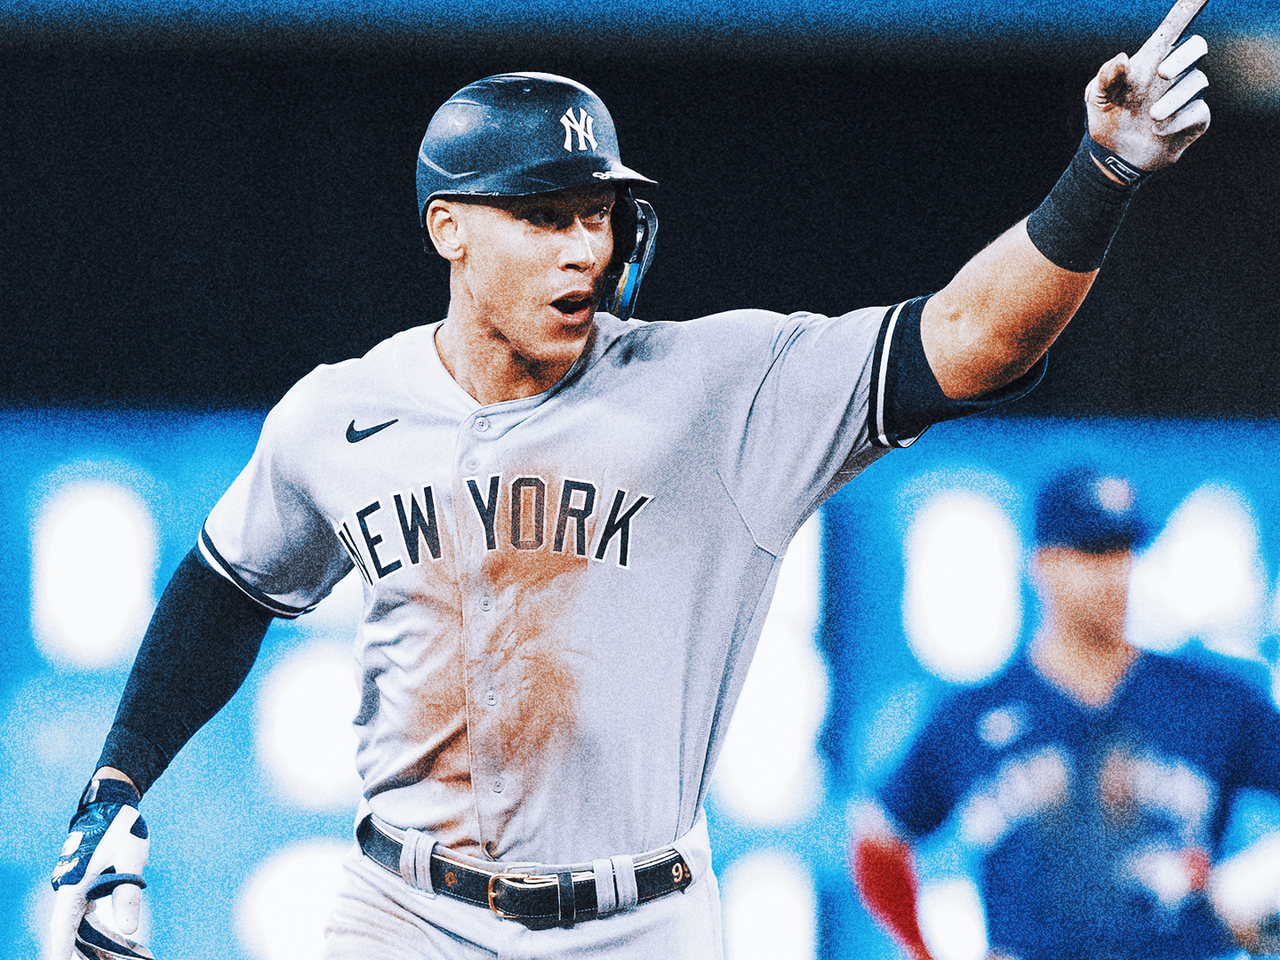 A pretty cool moment': Aaron Judge becomes the first Yankee to homer in  All-Star Game since 2003 - The Athletic